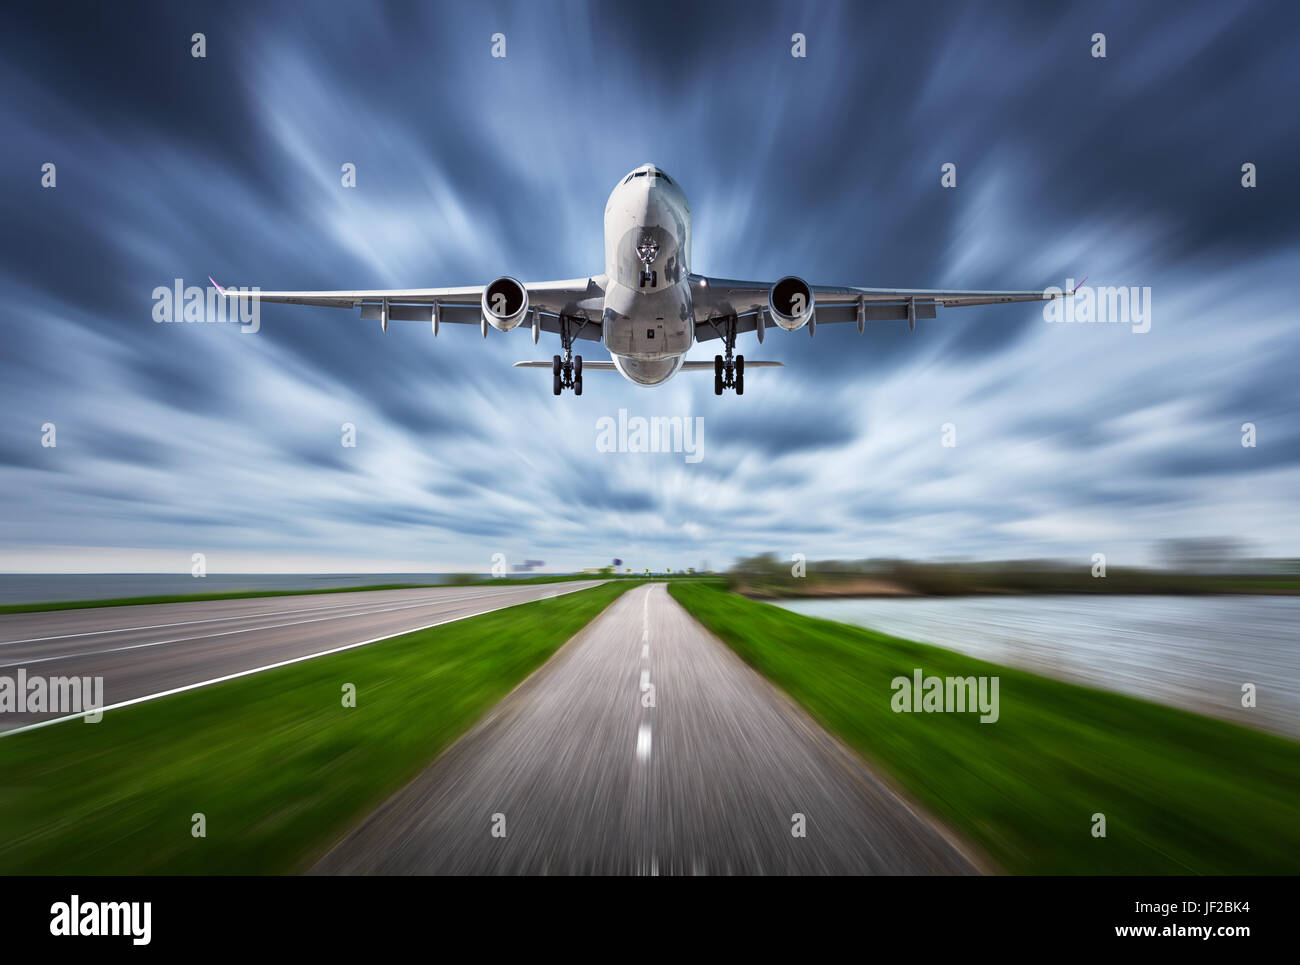 Airplane and road with motion blur effect. Landscape with white passenger airplane is flying in the cloudy sky over the asphalt road. Blurred. Passeng Stock Photo